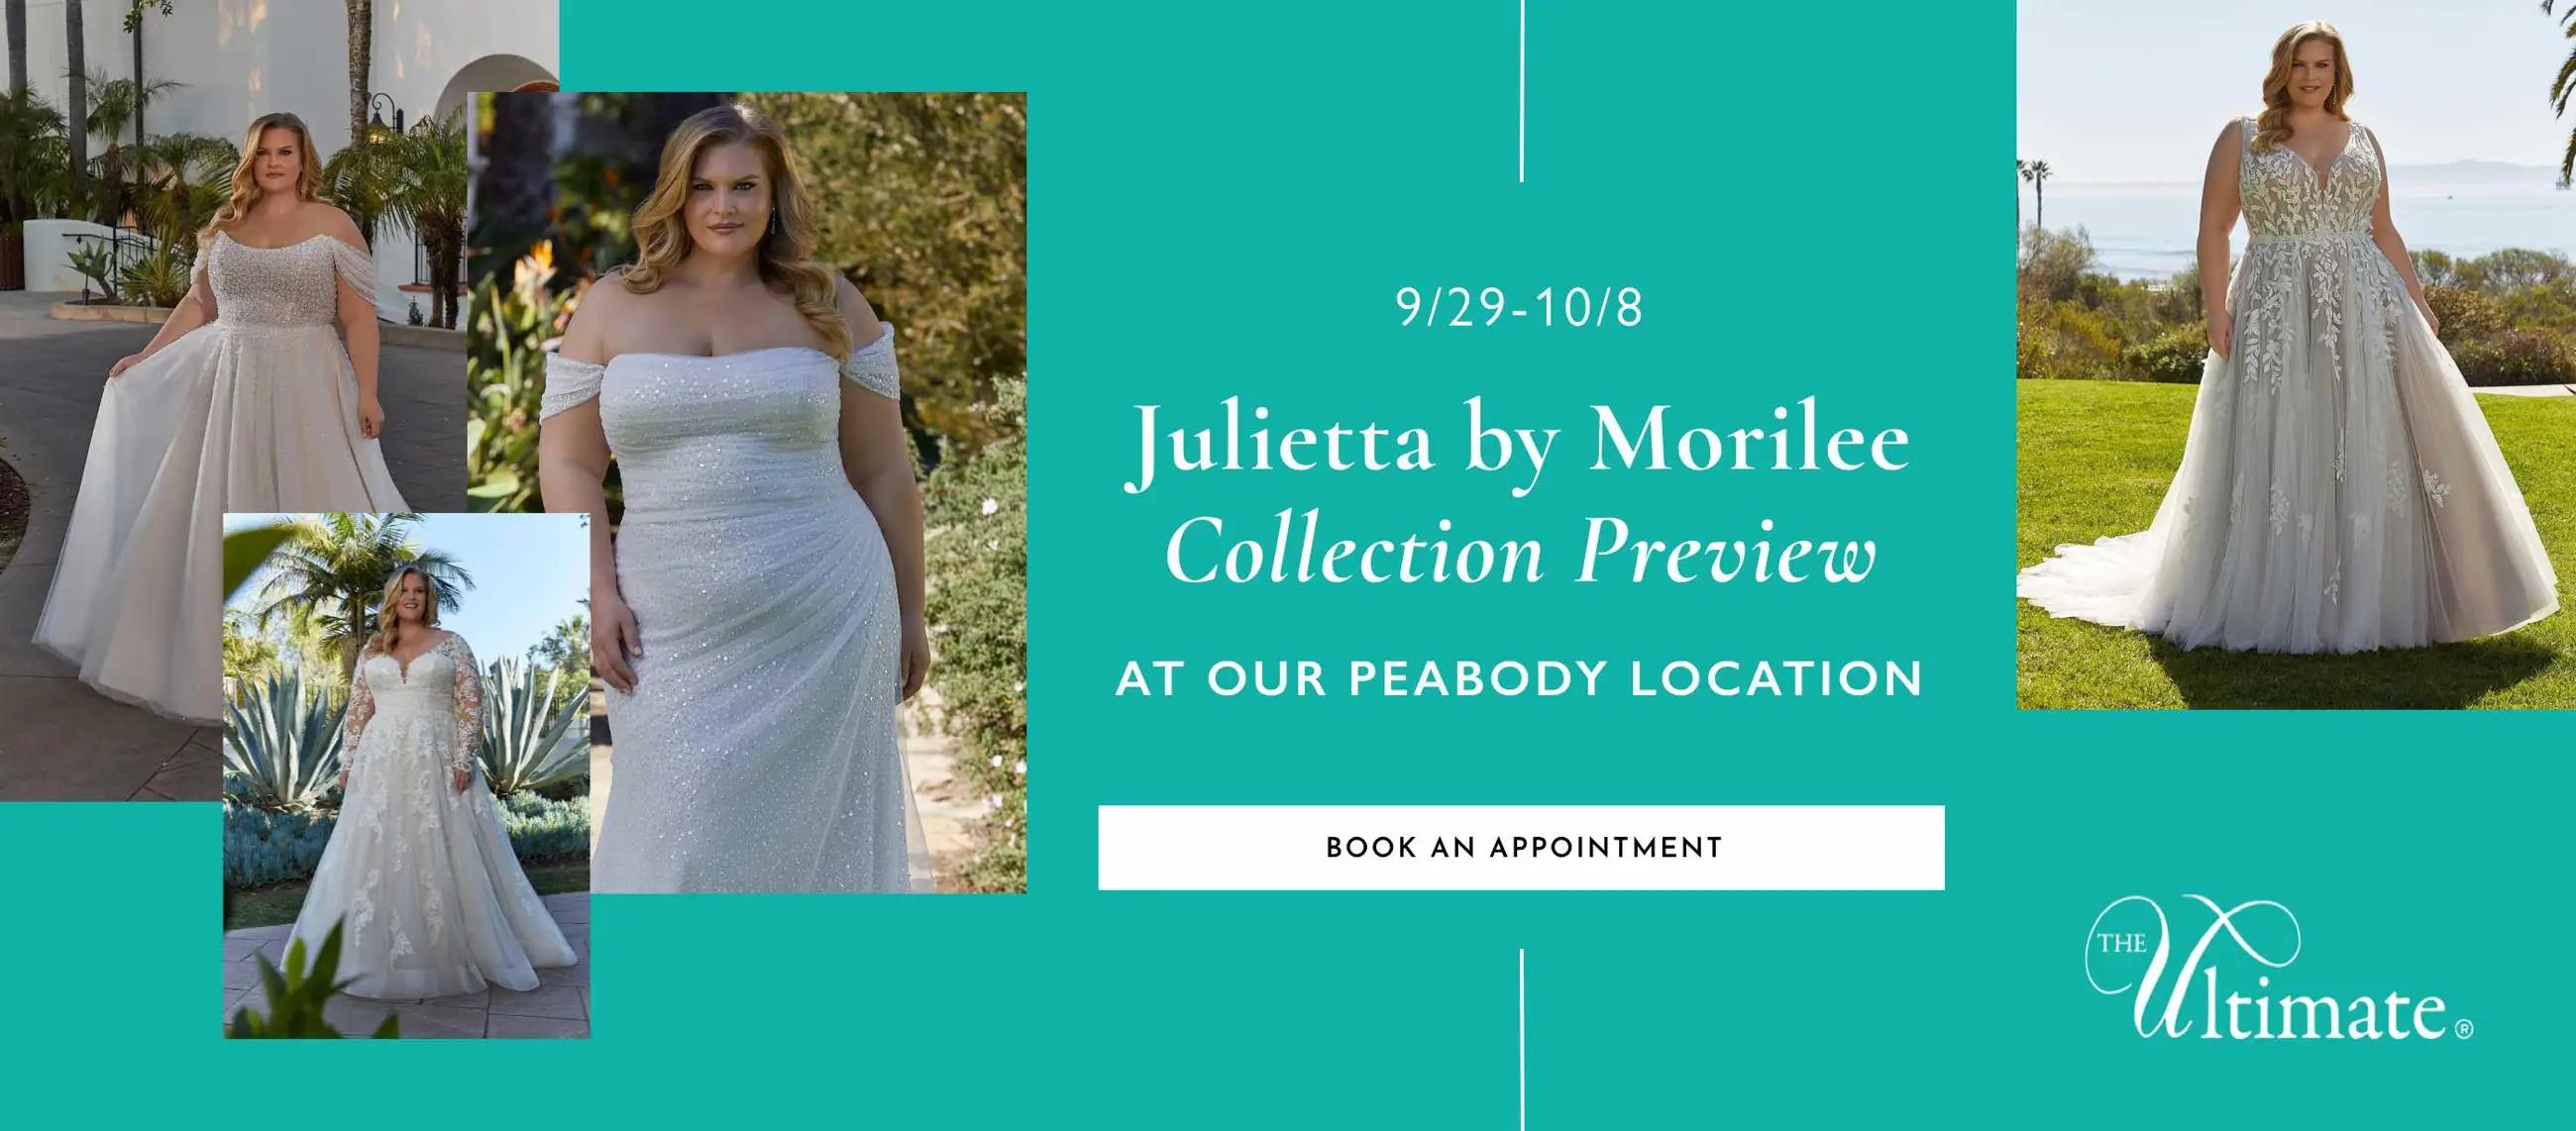 Julietta by Morilee collection preview at The Ultimate Peabody